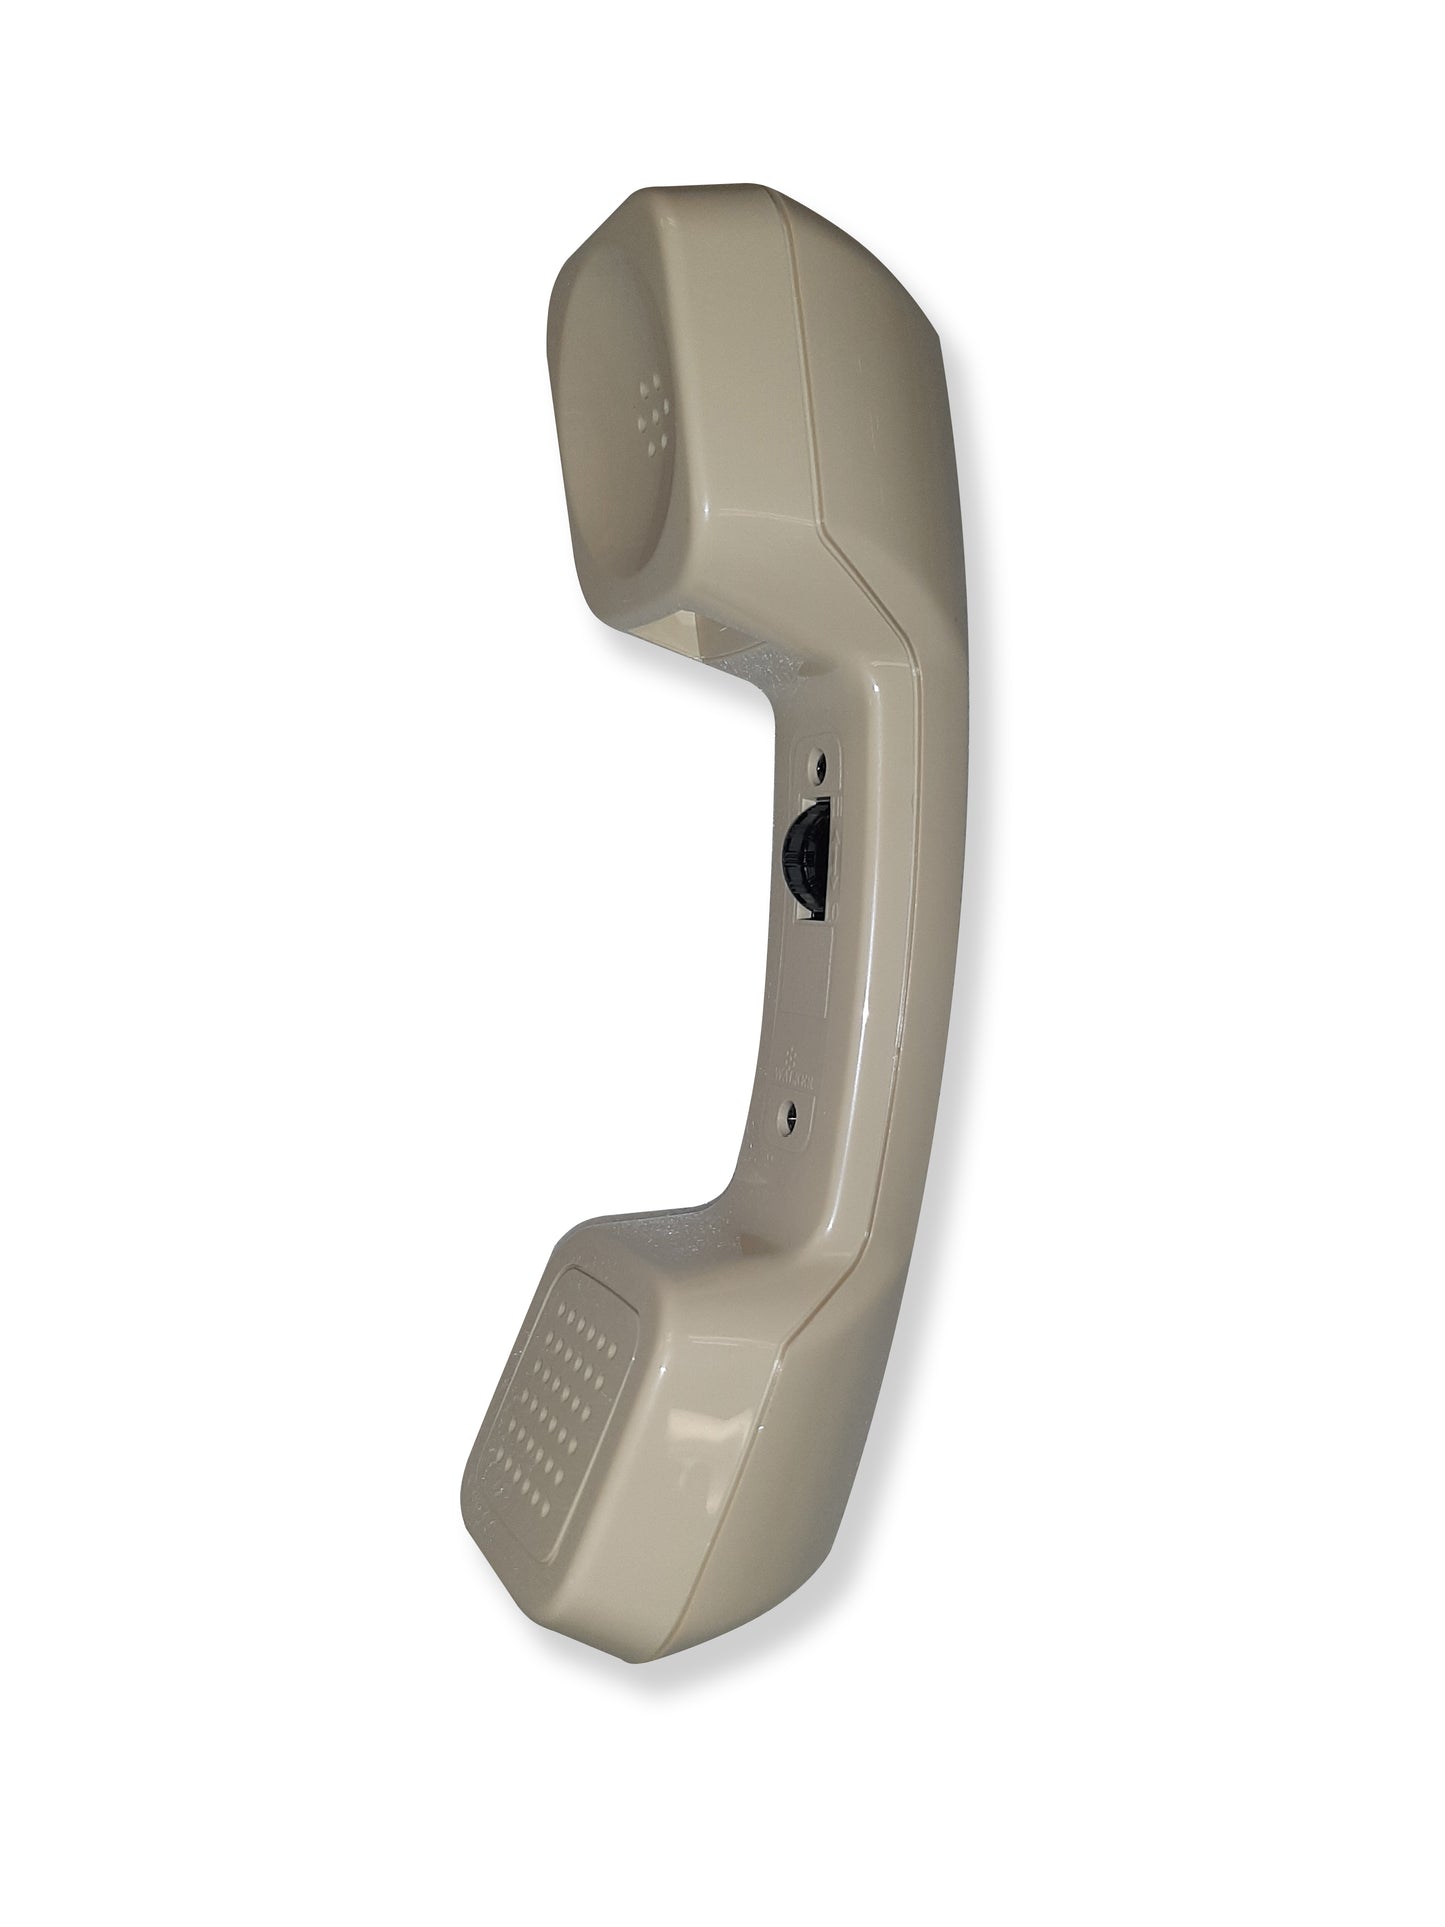 Forester Solutions Inc K-M-NC-2-ASH 50605.005 Amplified Handset